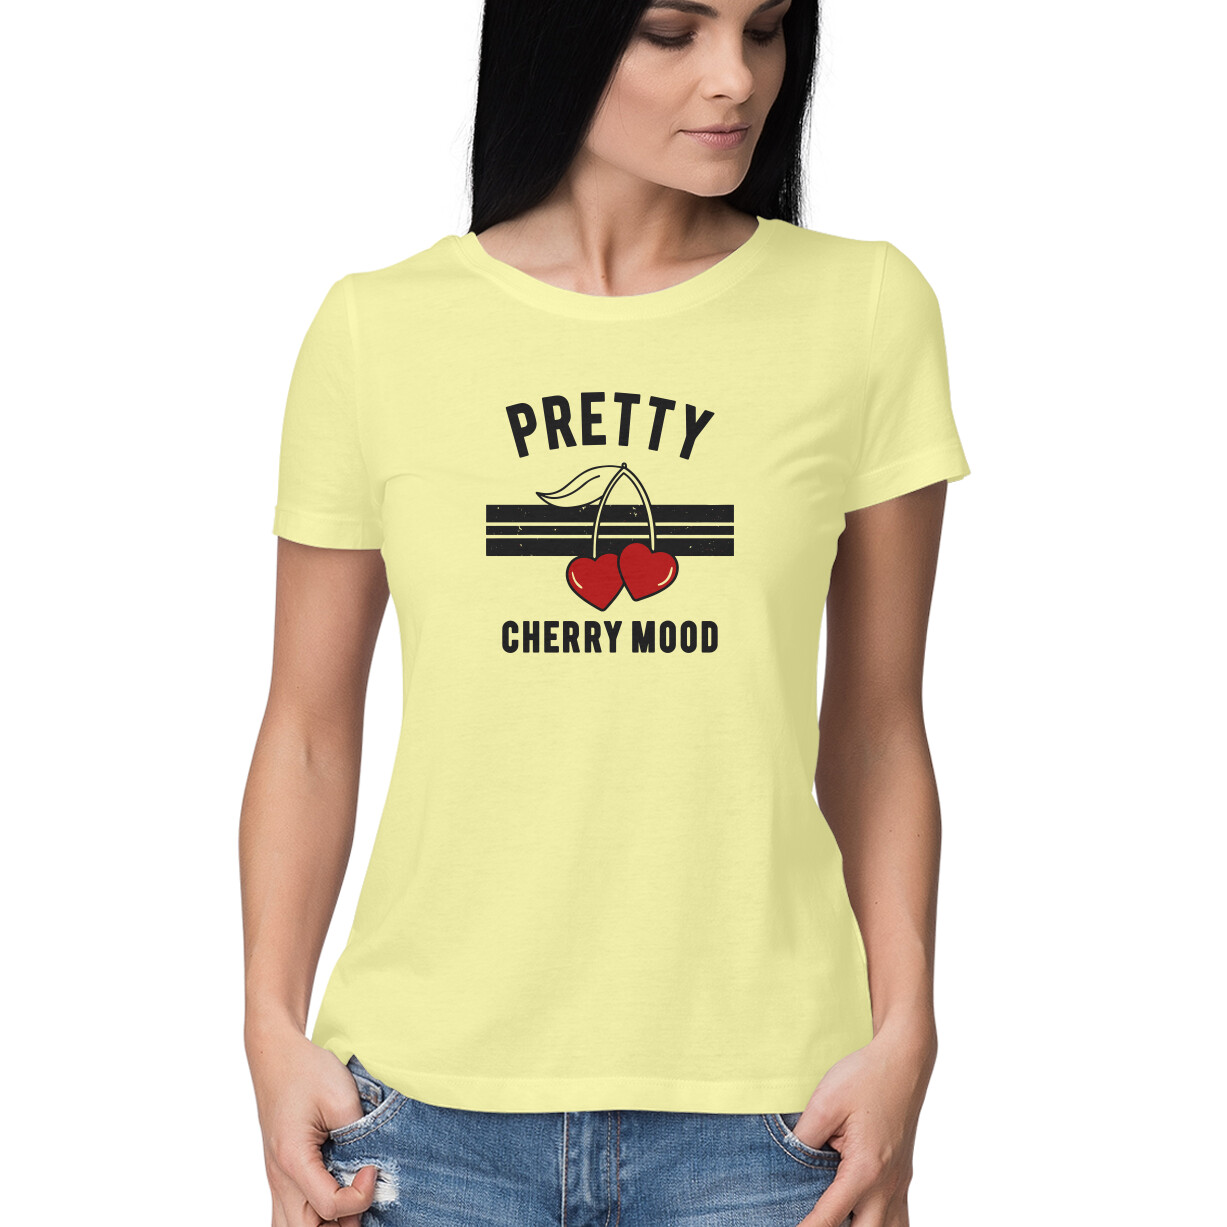 PRETTY CHERRY MOOD, Funny T-shirt quotes and sayings